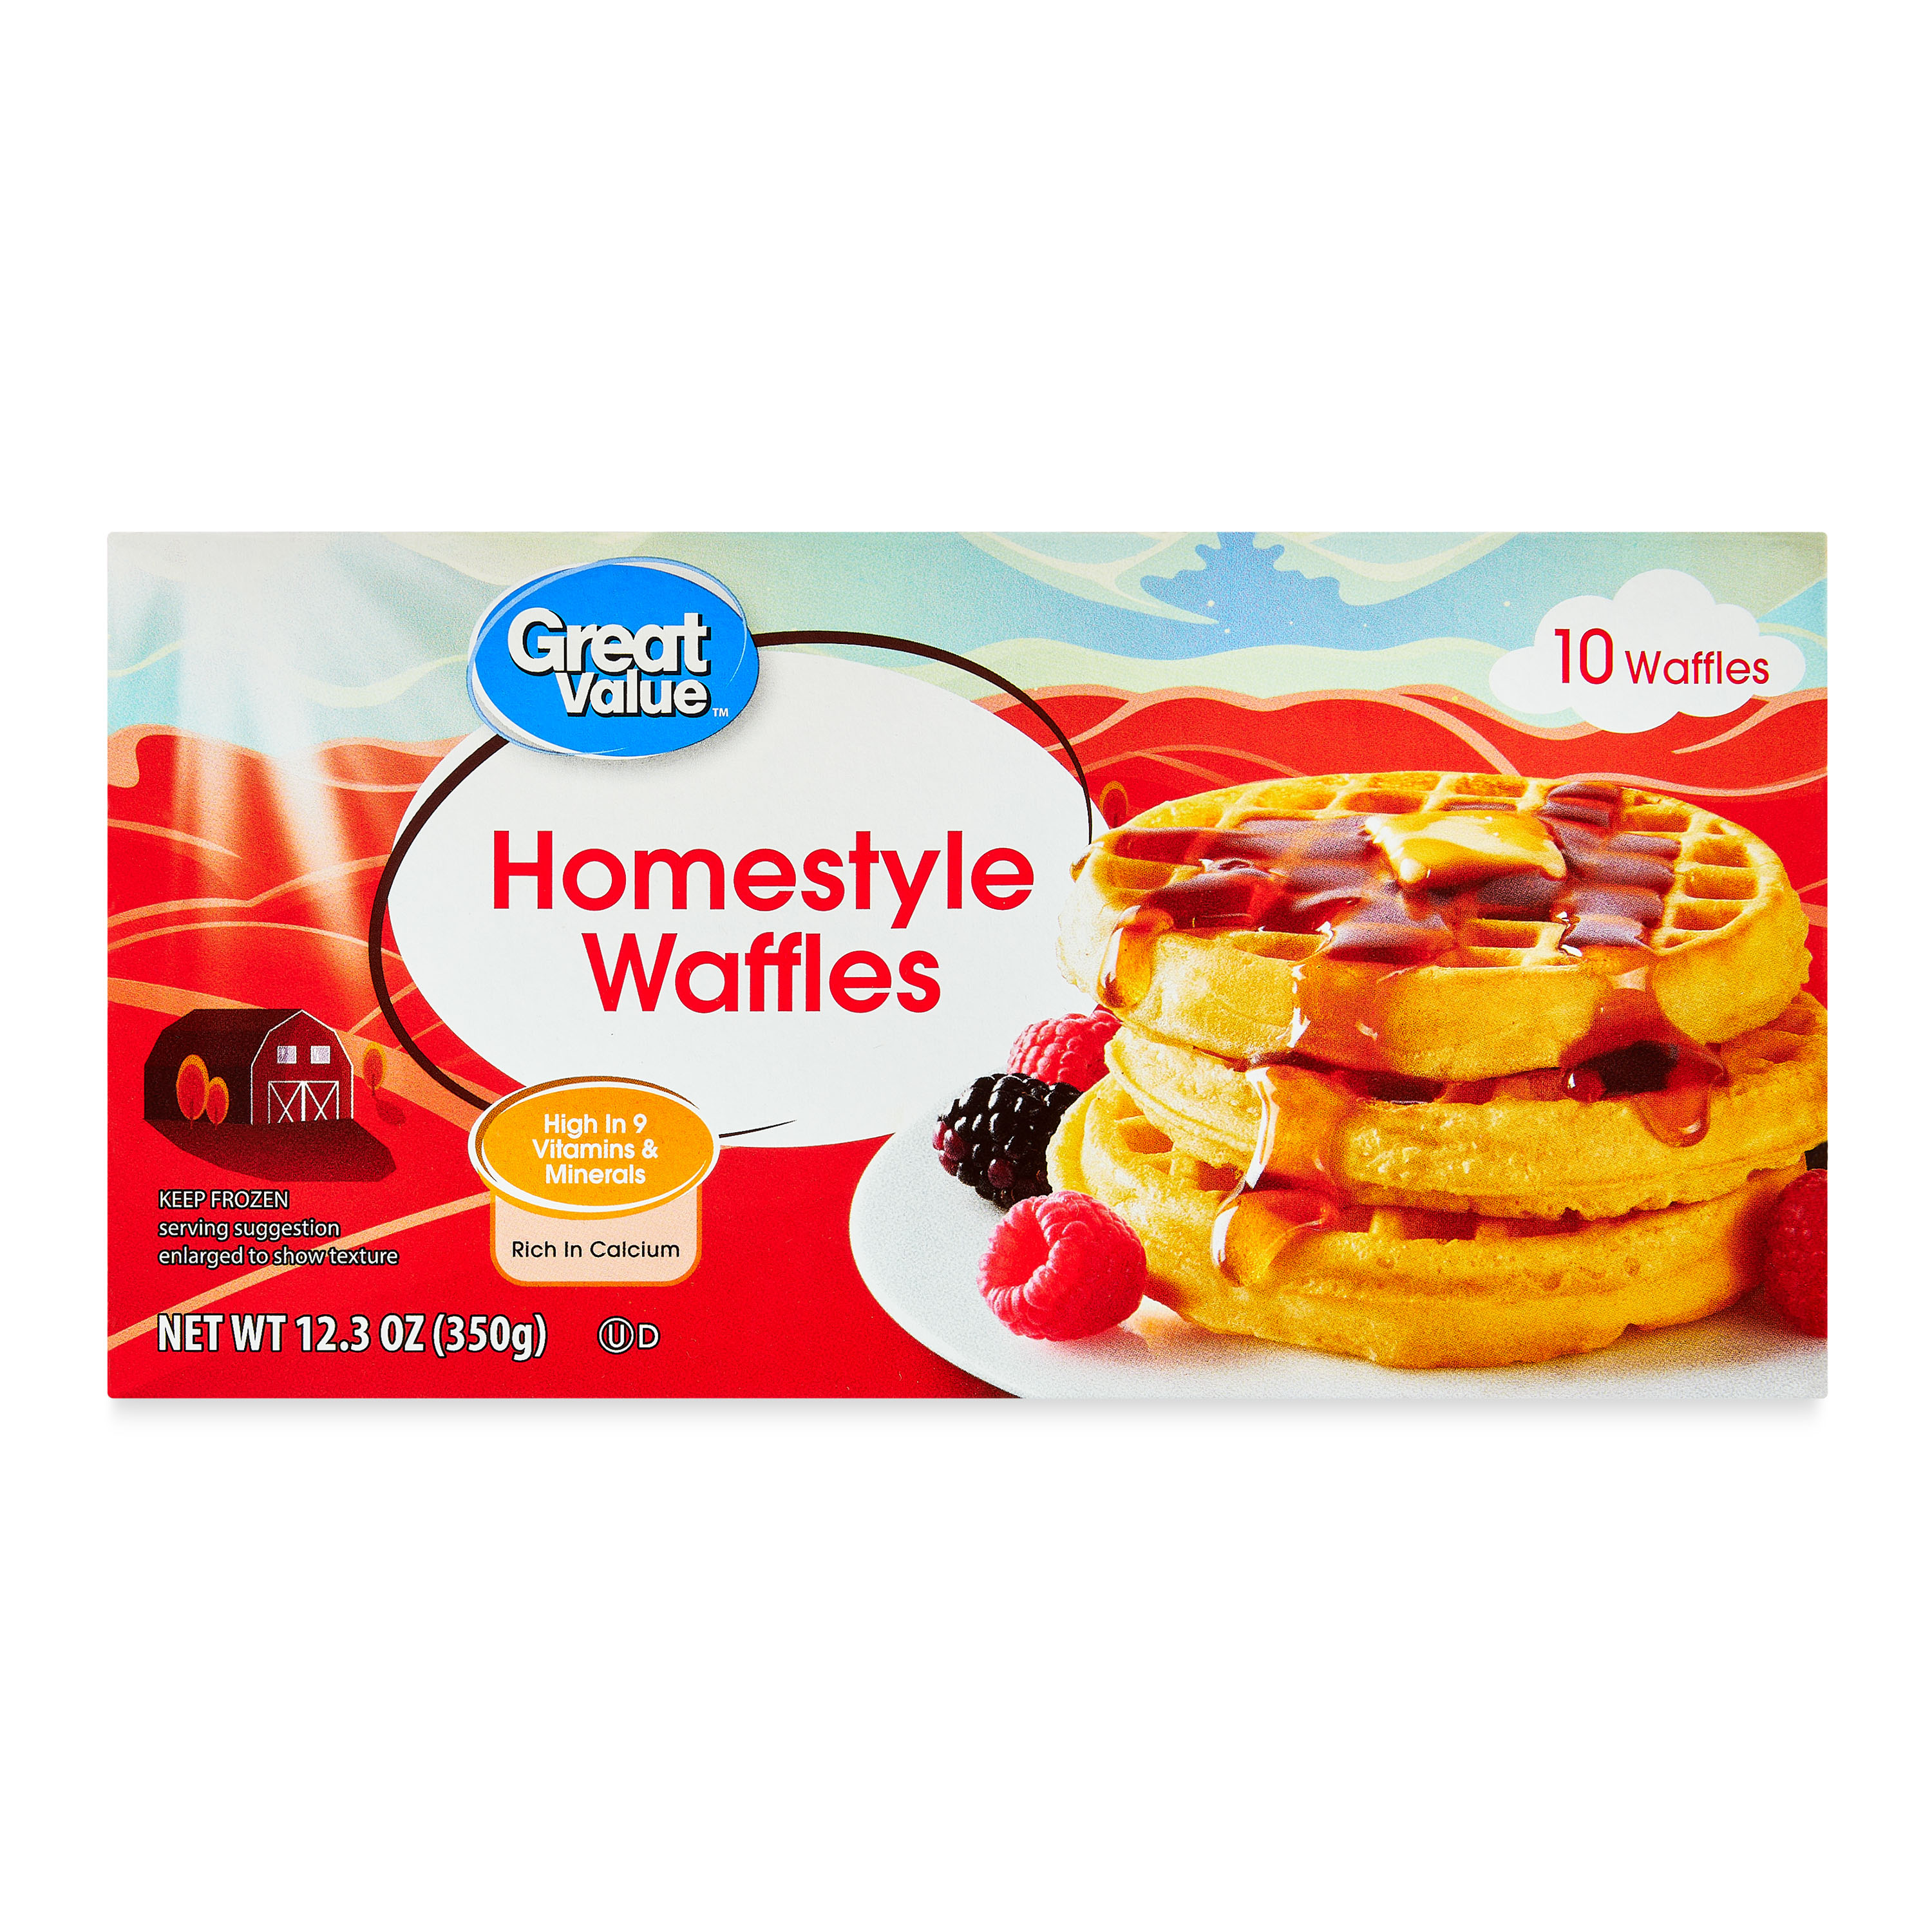 Great Value Homestyle Waffles, 12.3 oz, 10 Count (Frozen) - image 1 of 9